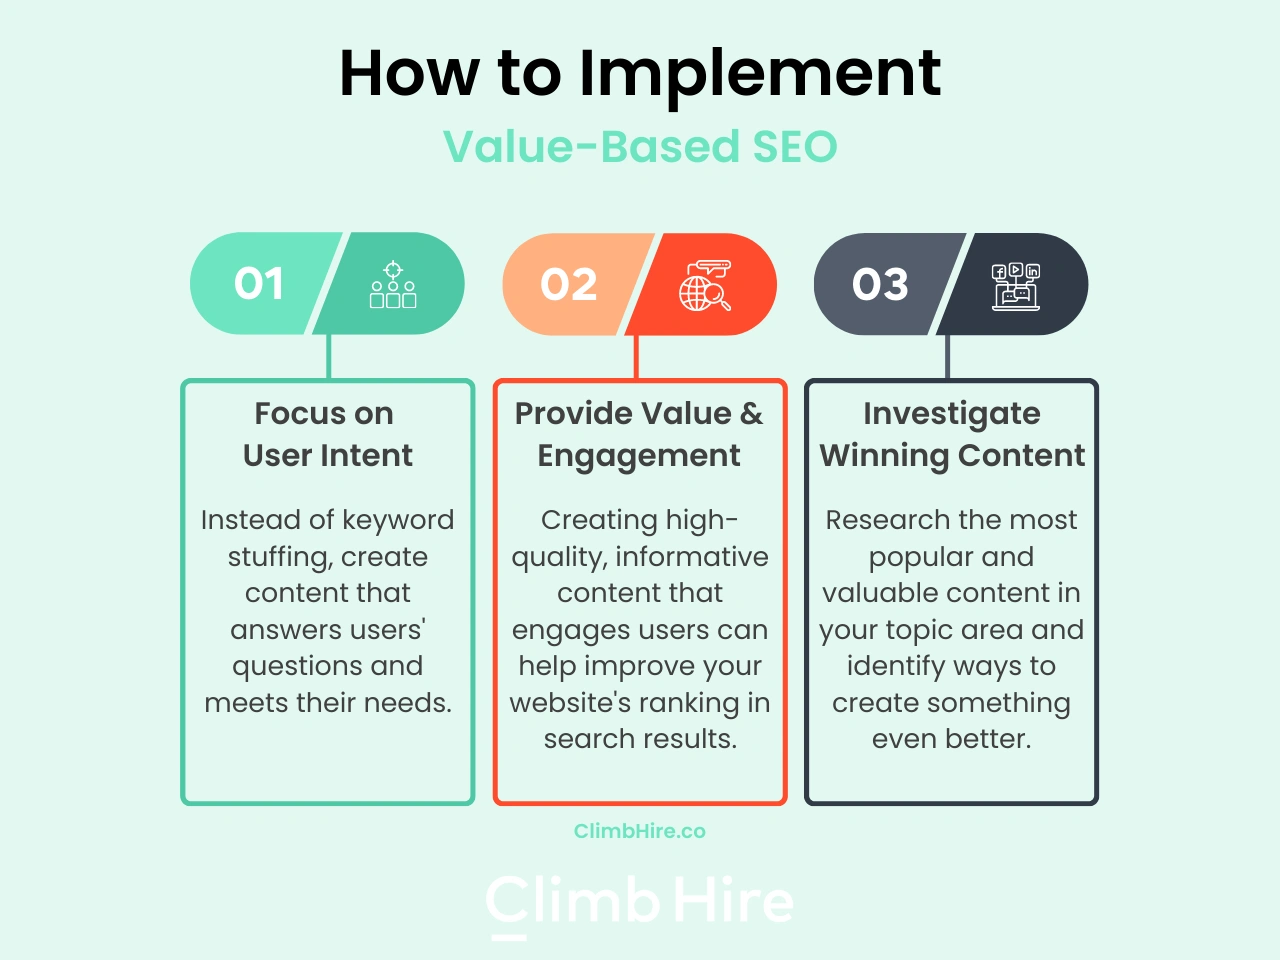 How to Implement Value-Based SEO. Focus on User Intent. Provide Value & Engagement. Investigate winning content.